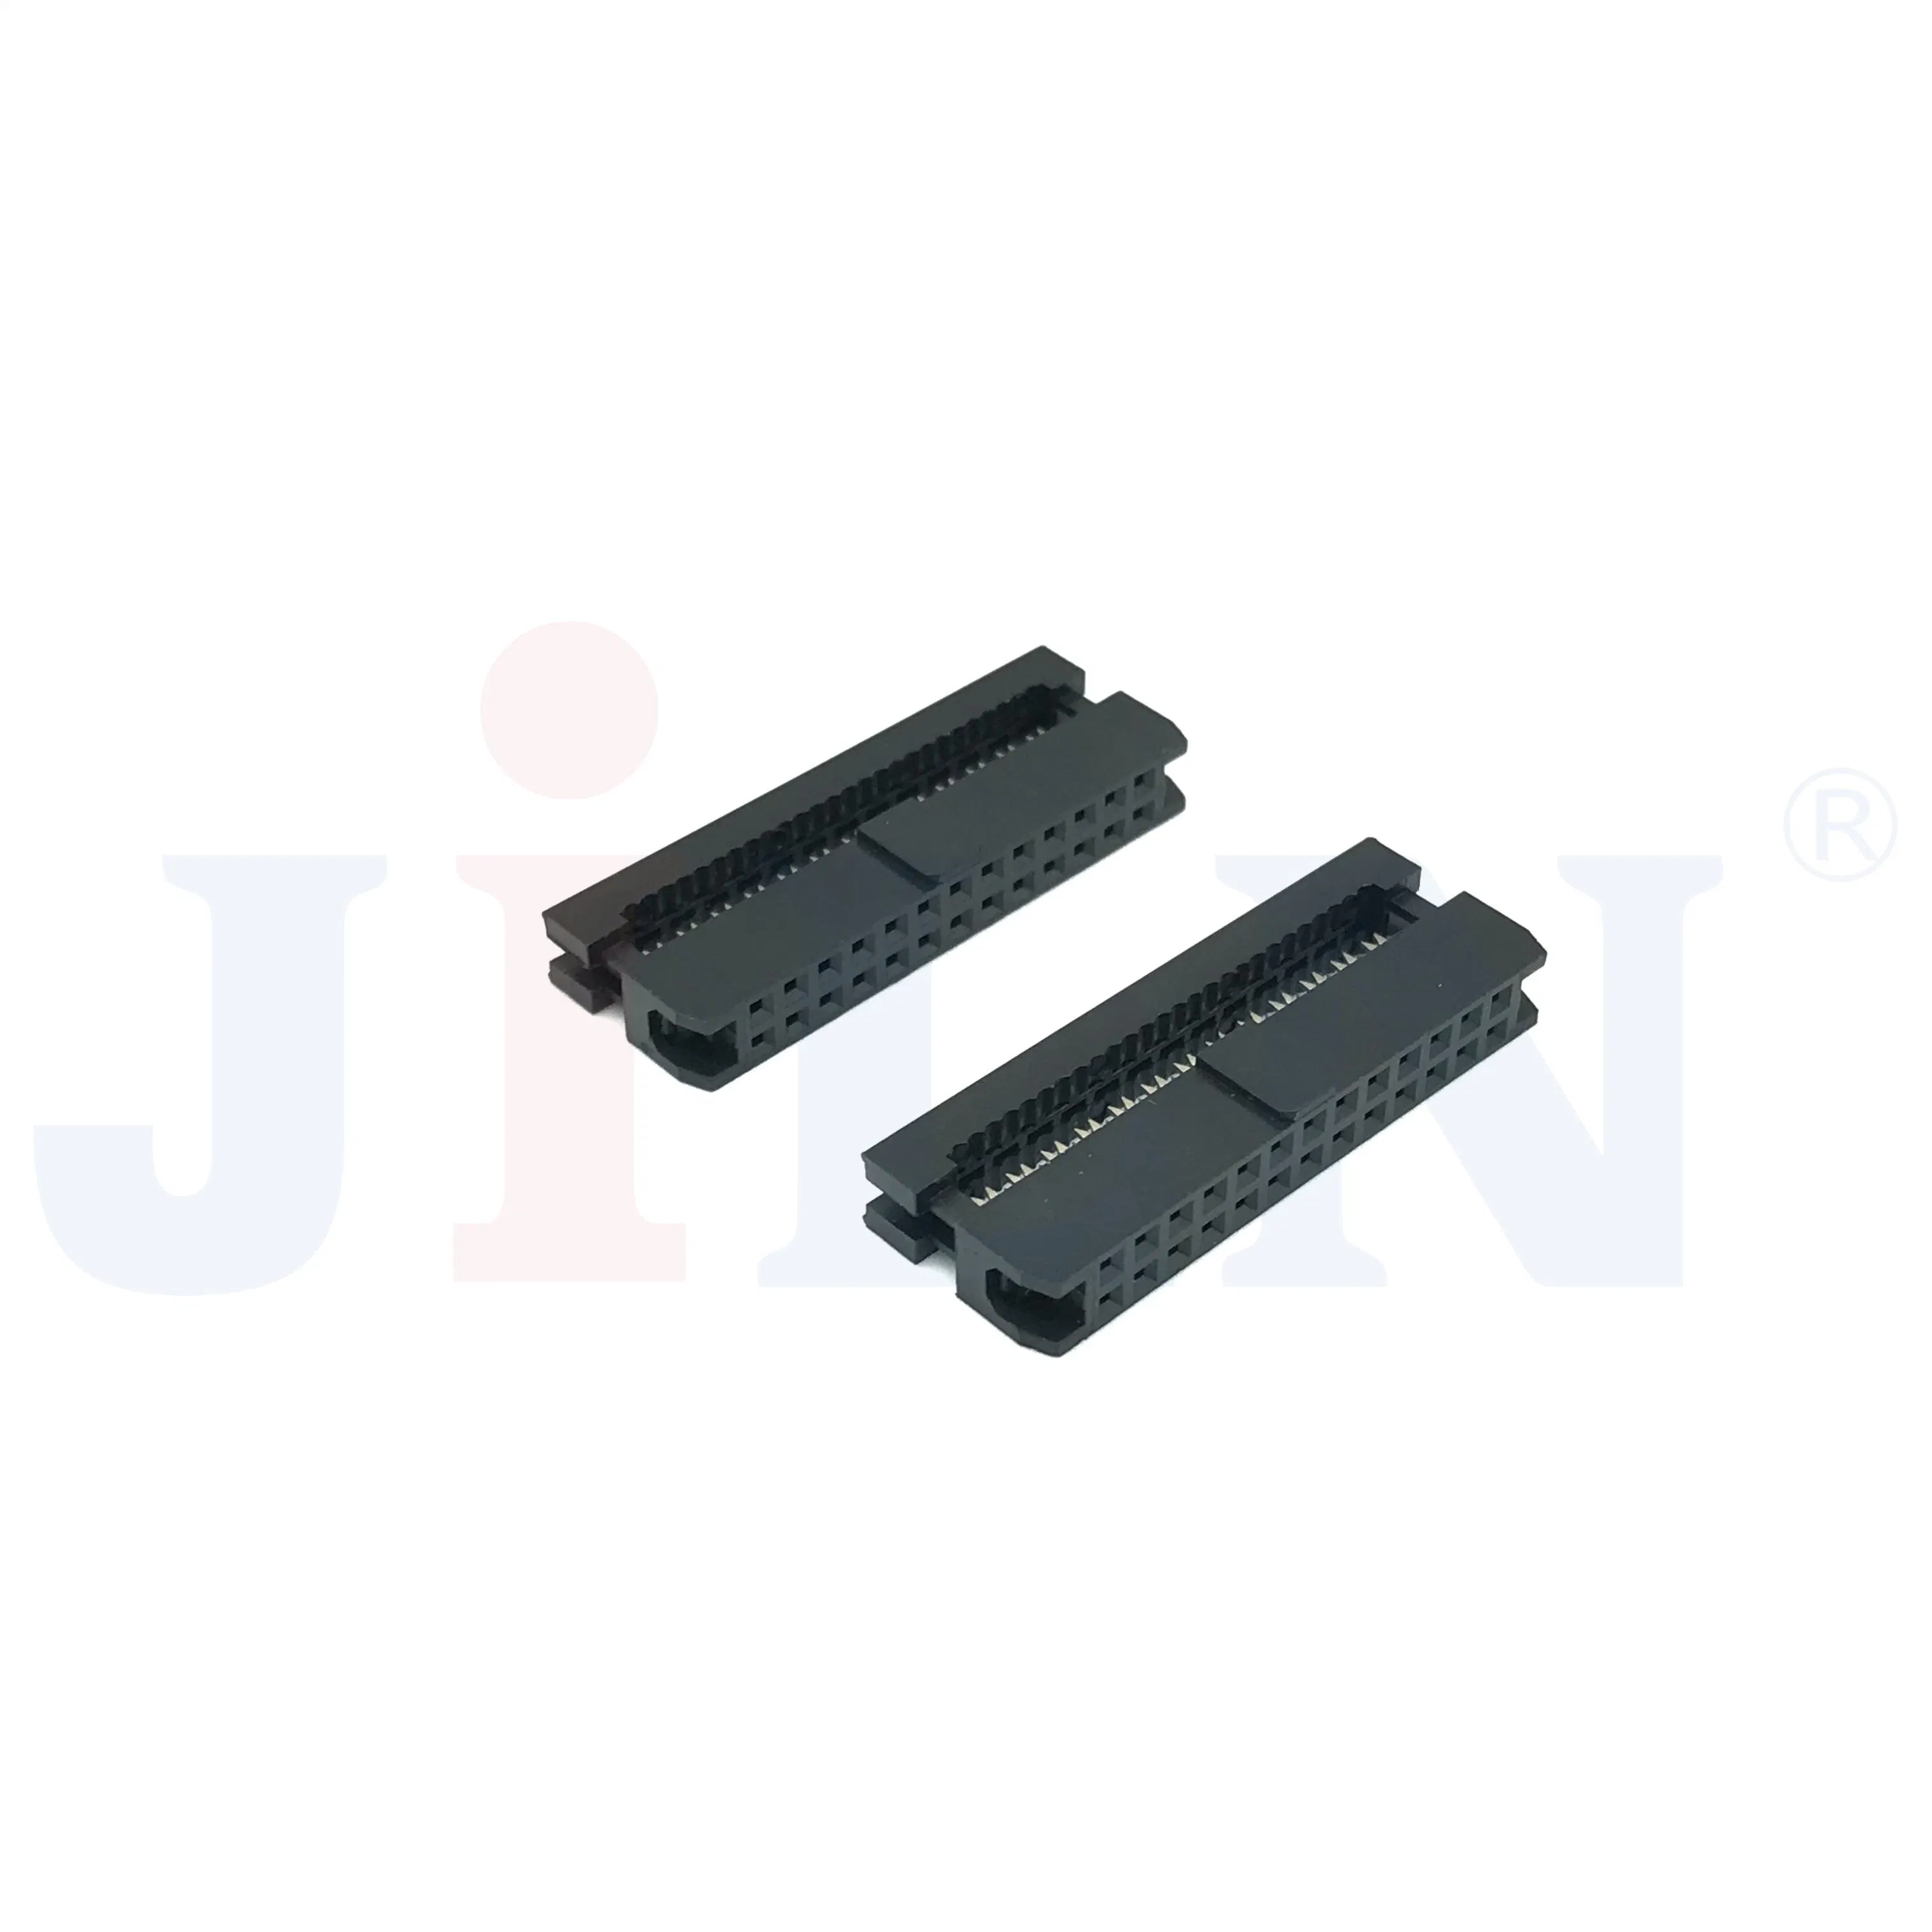 Strong Corrosion Resistance, Suitable for Special Environments Such as Acid, Alkali and Salt Spray IDC Connector